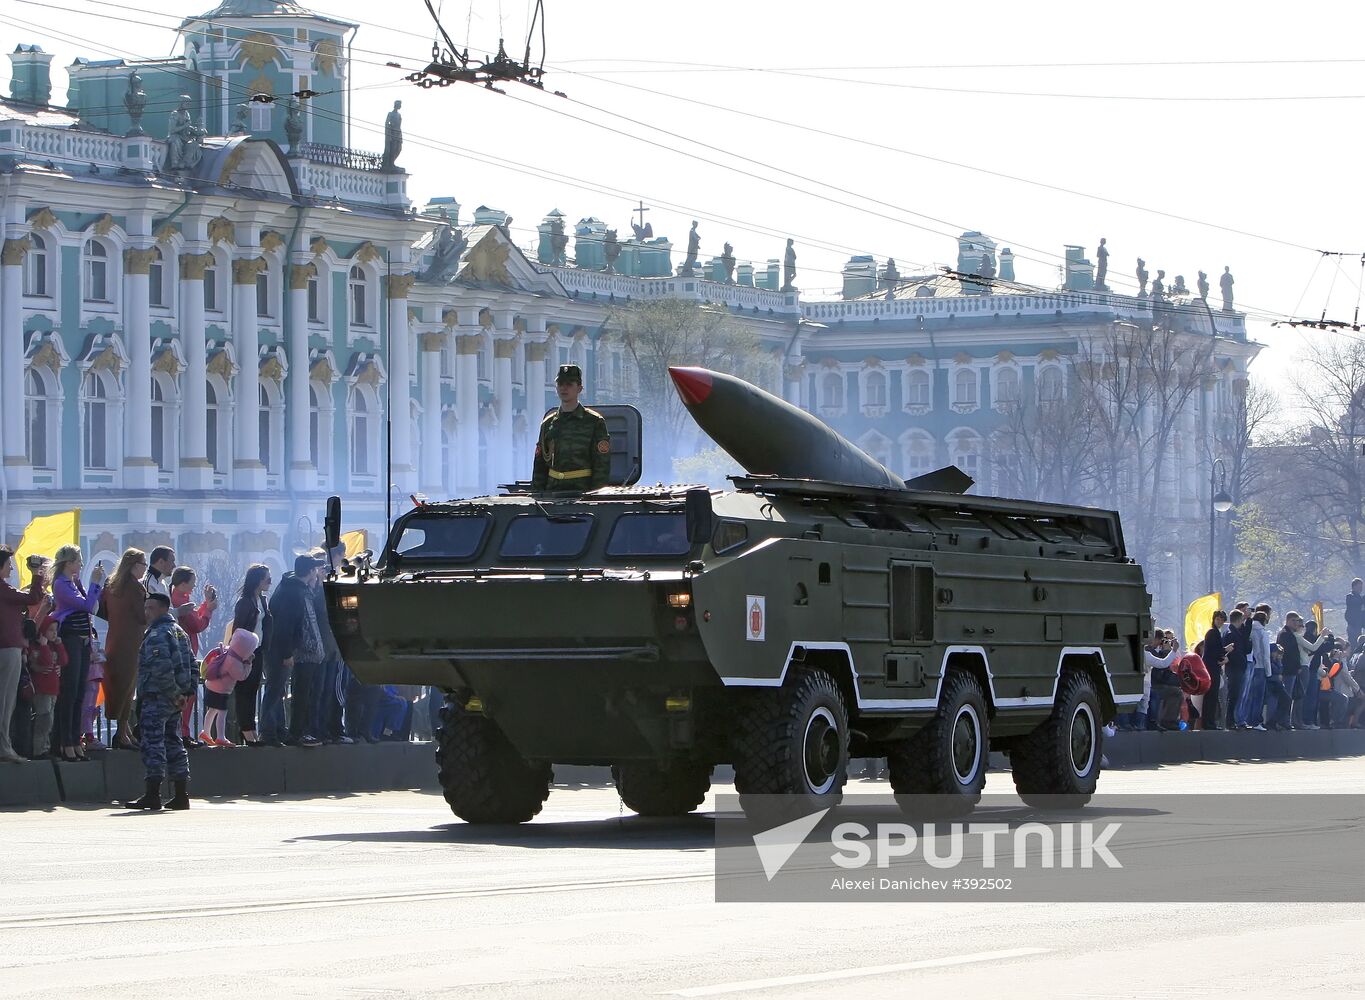 Victory Day celebrations in St. Petersburg